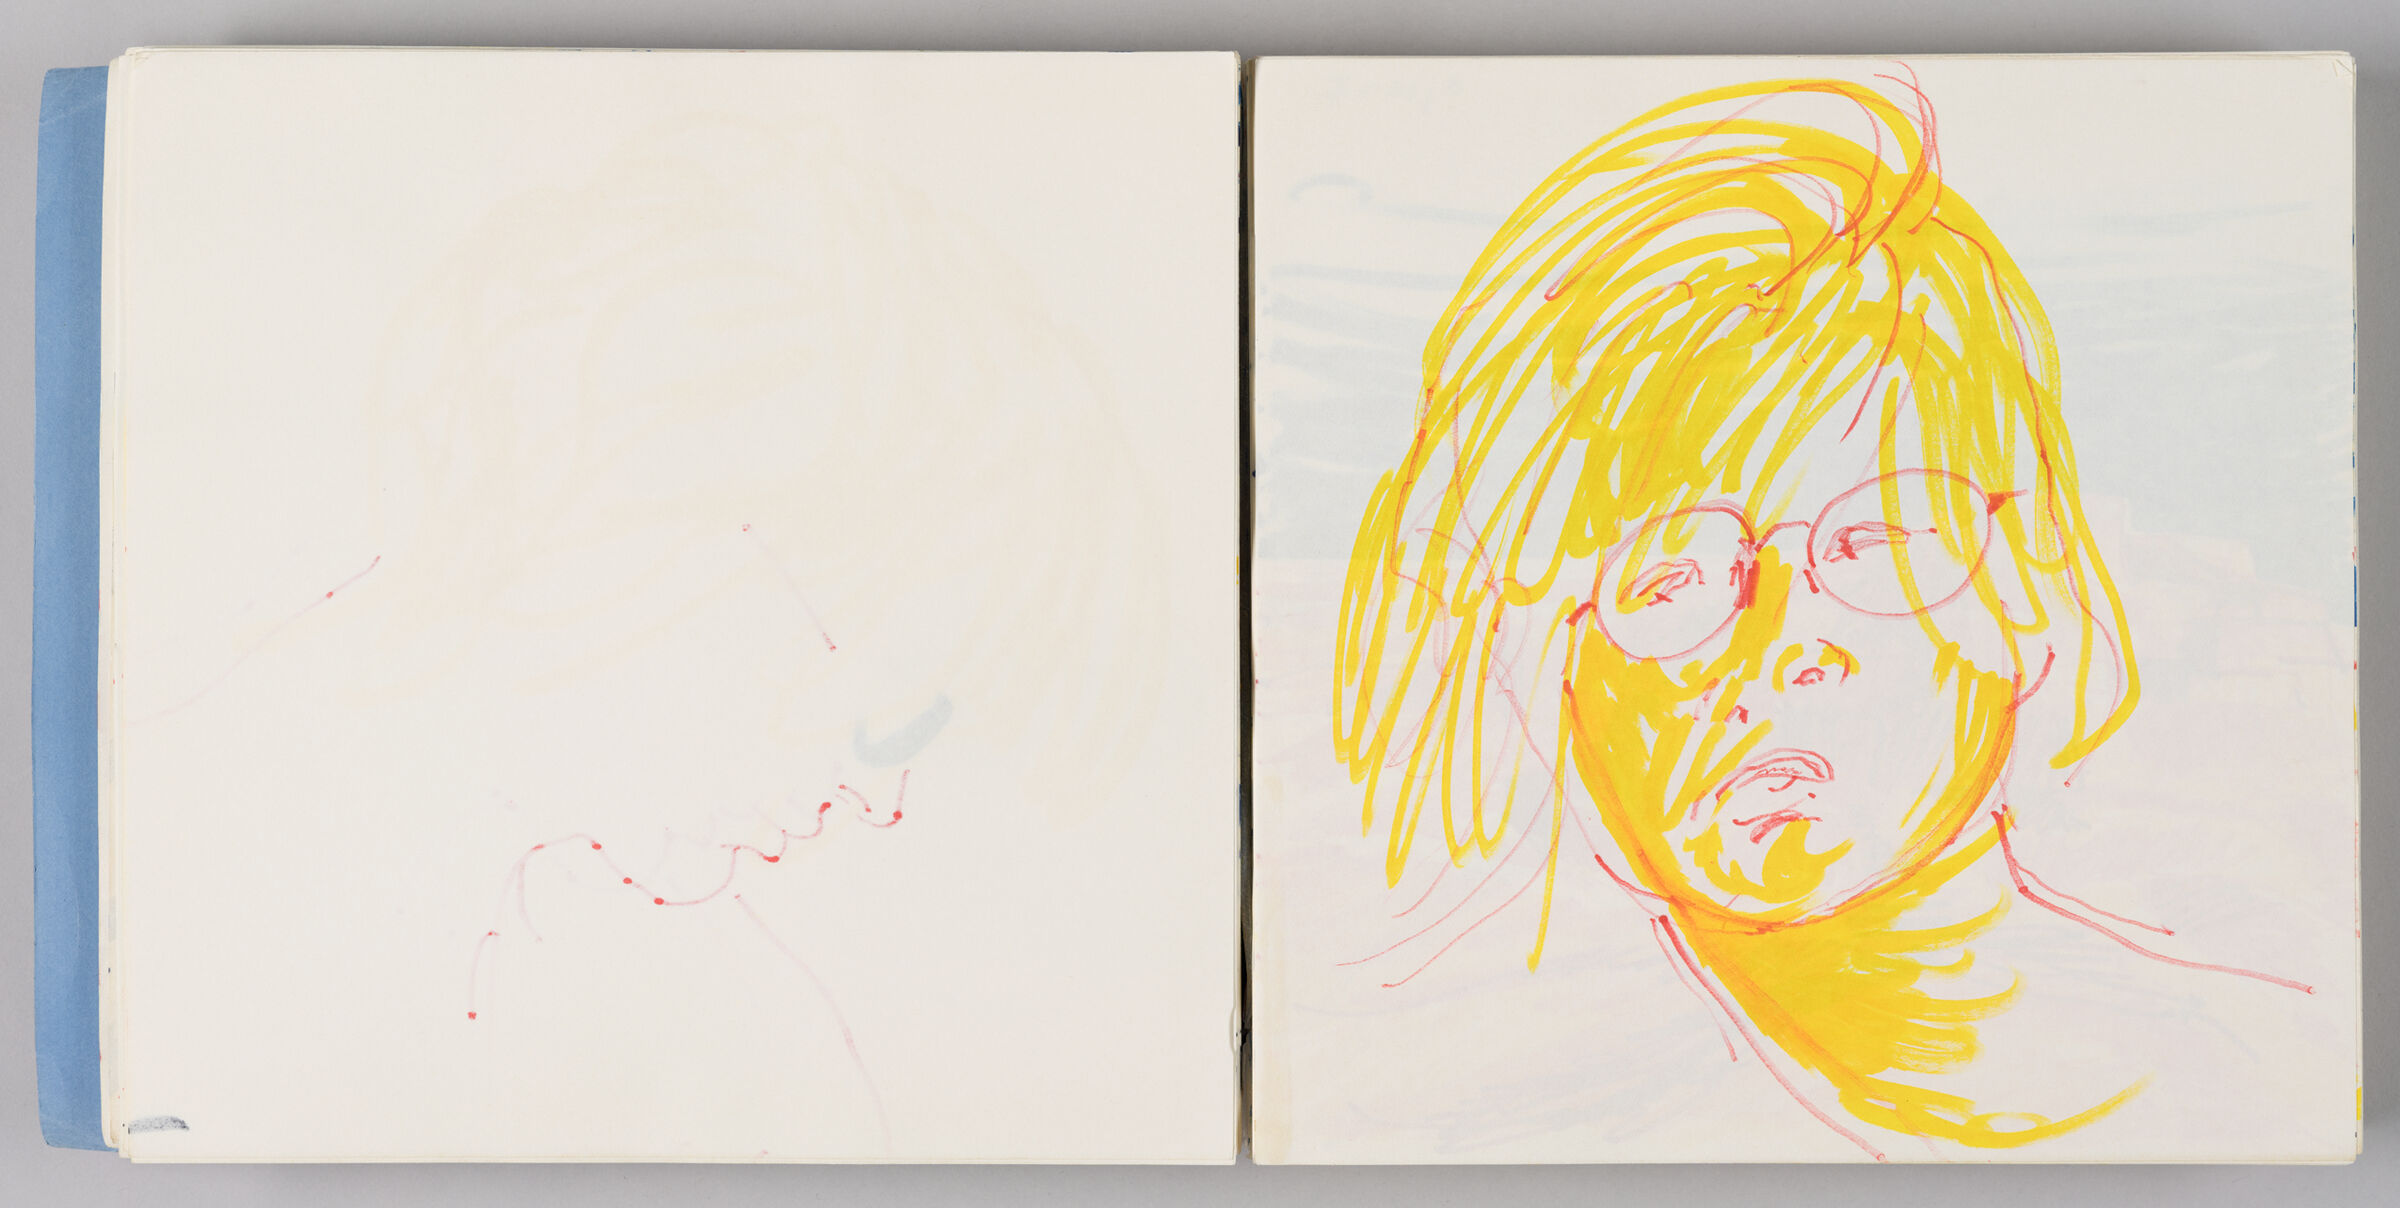 Untitled (Bleed-Through Of Previous Page, Left Page); Untitled (Portrait Of Female Figure [Elizabeth], Right Page)
